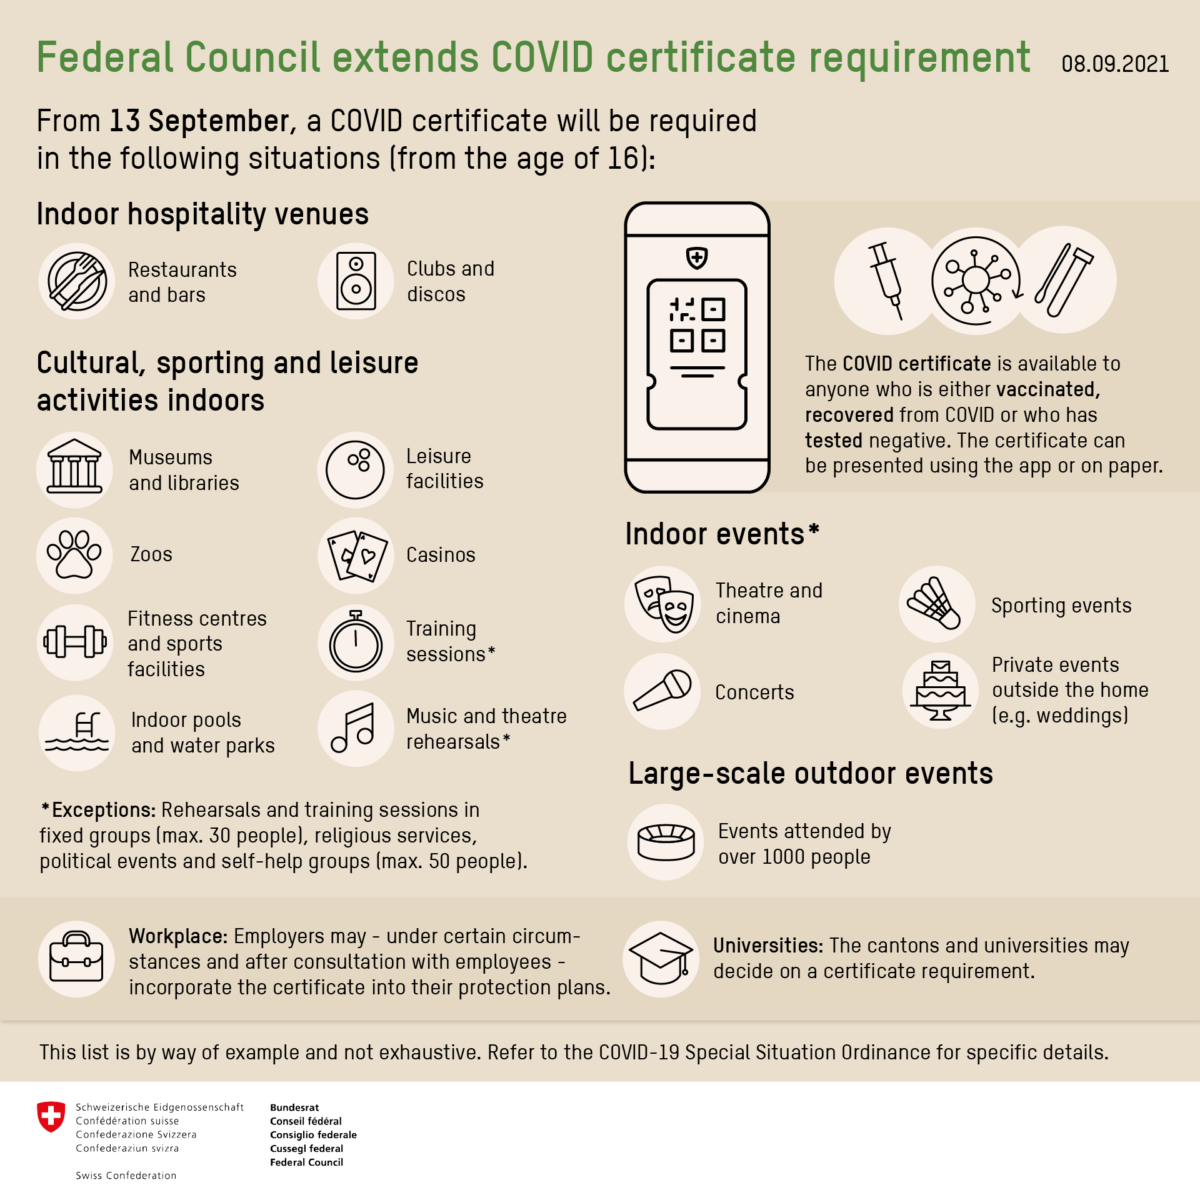 A document shows the new covid rules and regulations in switzerland outlining which indoor activities require proof of covid vaccination